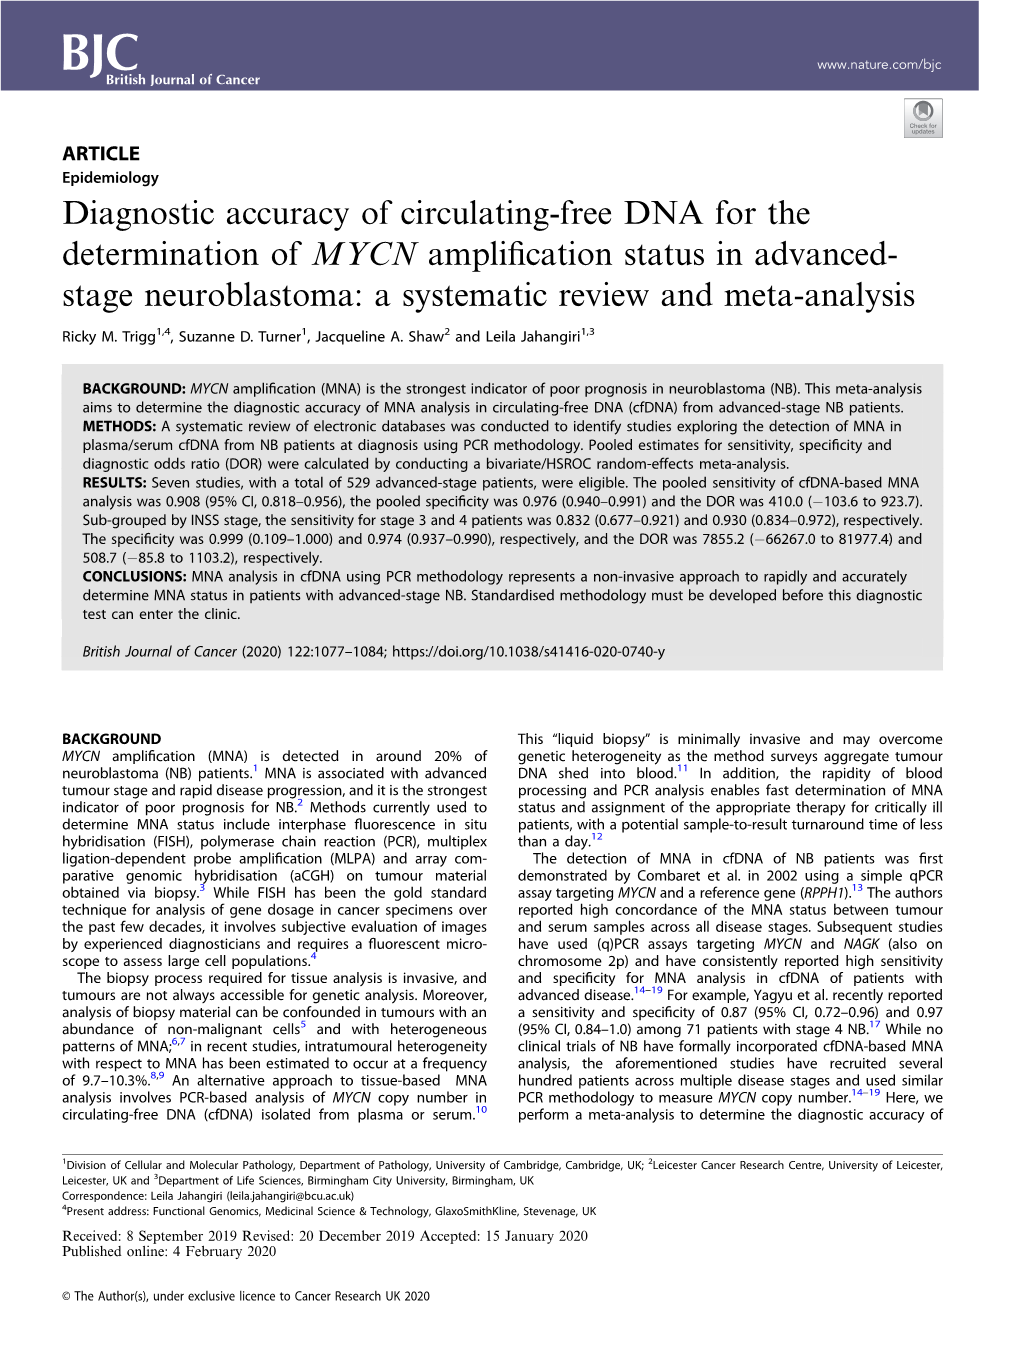 Diagnostic Accuracy of Circulating-Free DNA for the Determination of MYCN Ampliﬁcation Status in Advanced- Stage Neuroblastoma: a Systematic Review and Meta-Analysis